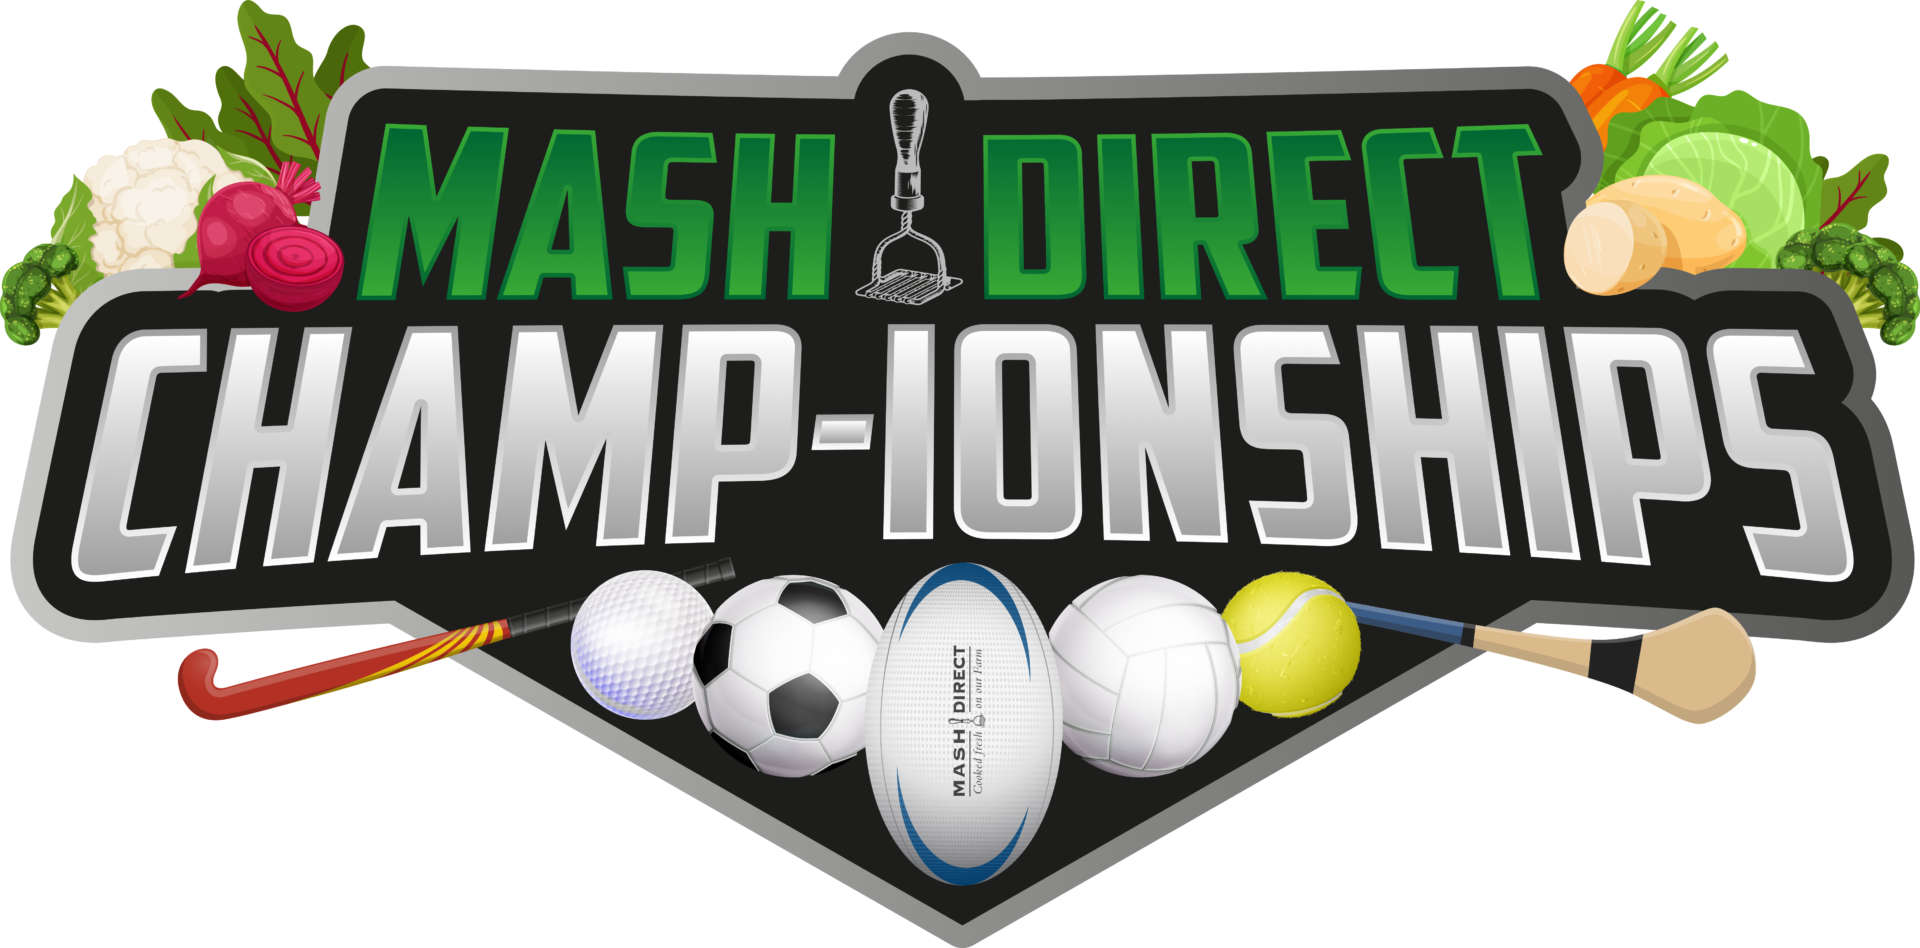 MASH DIRECT LAUNCHES ‘CHAMP-IONSHIPS’ CAMPAIGN TO SUPPORT THE SPORTS & FITNESS COMMUNITY POST-COVID 19 @mashdirect